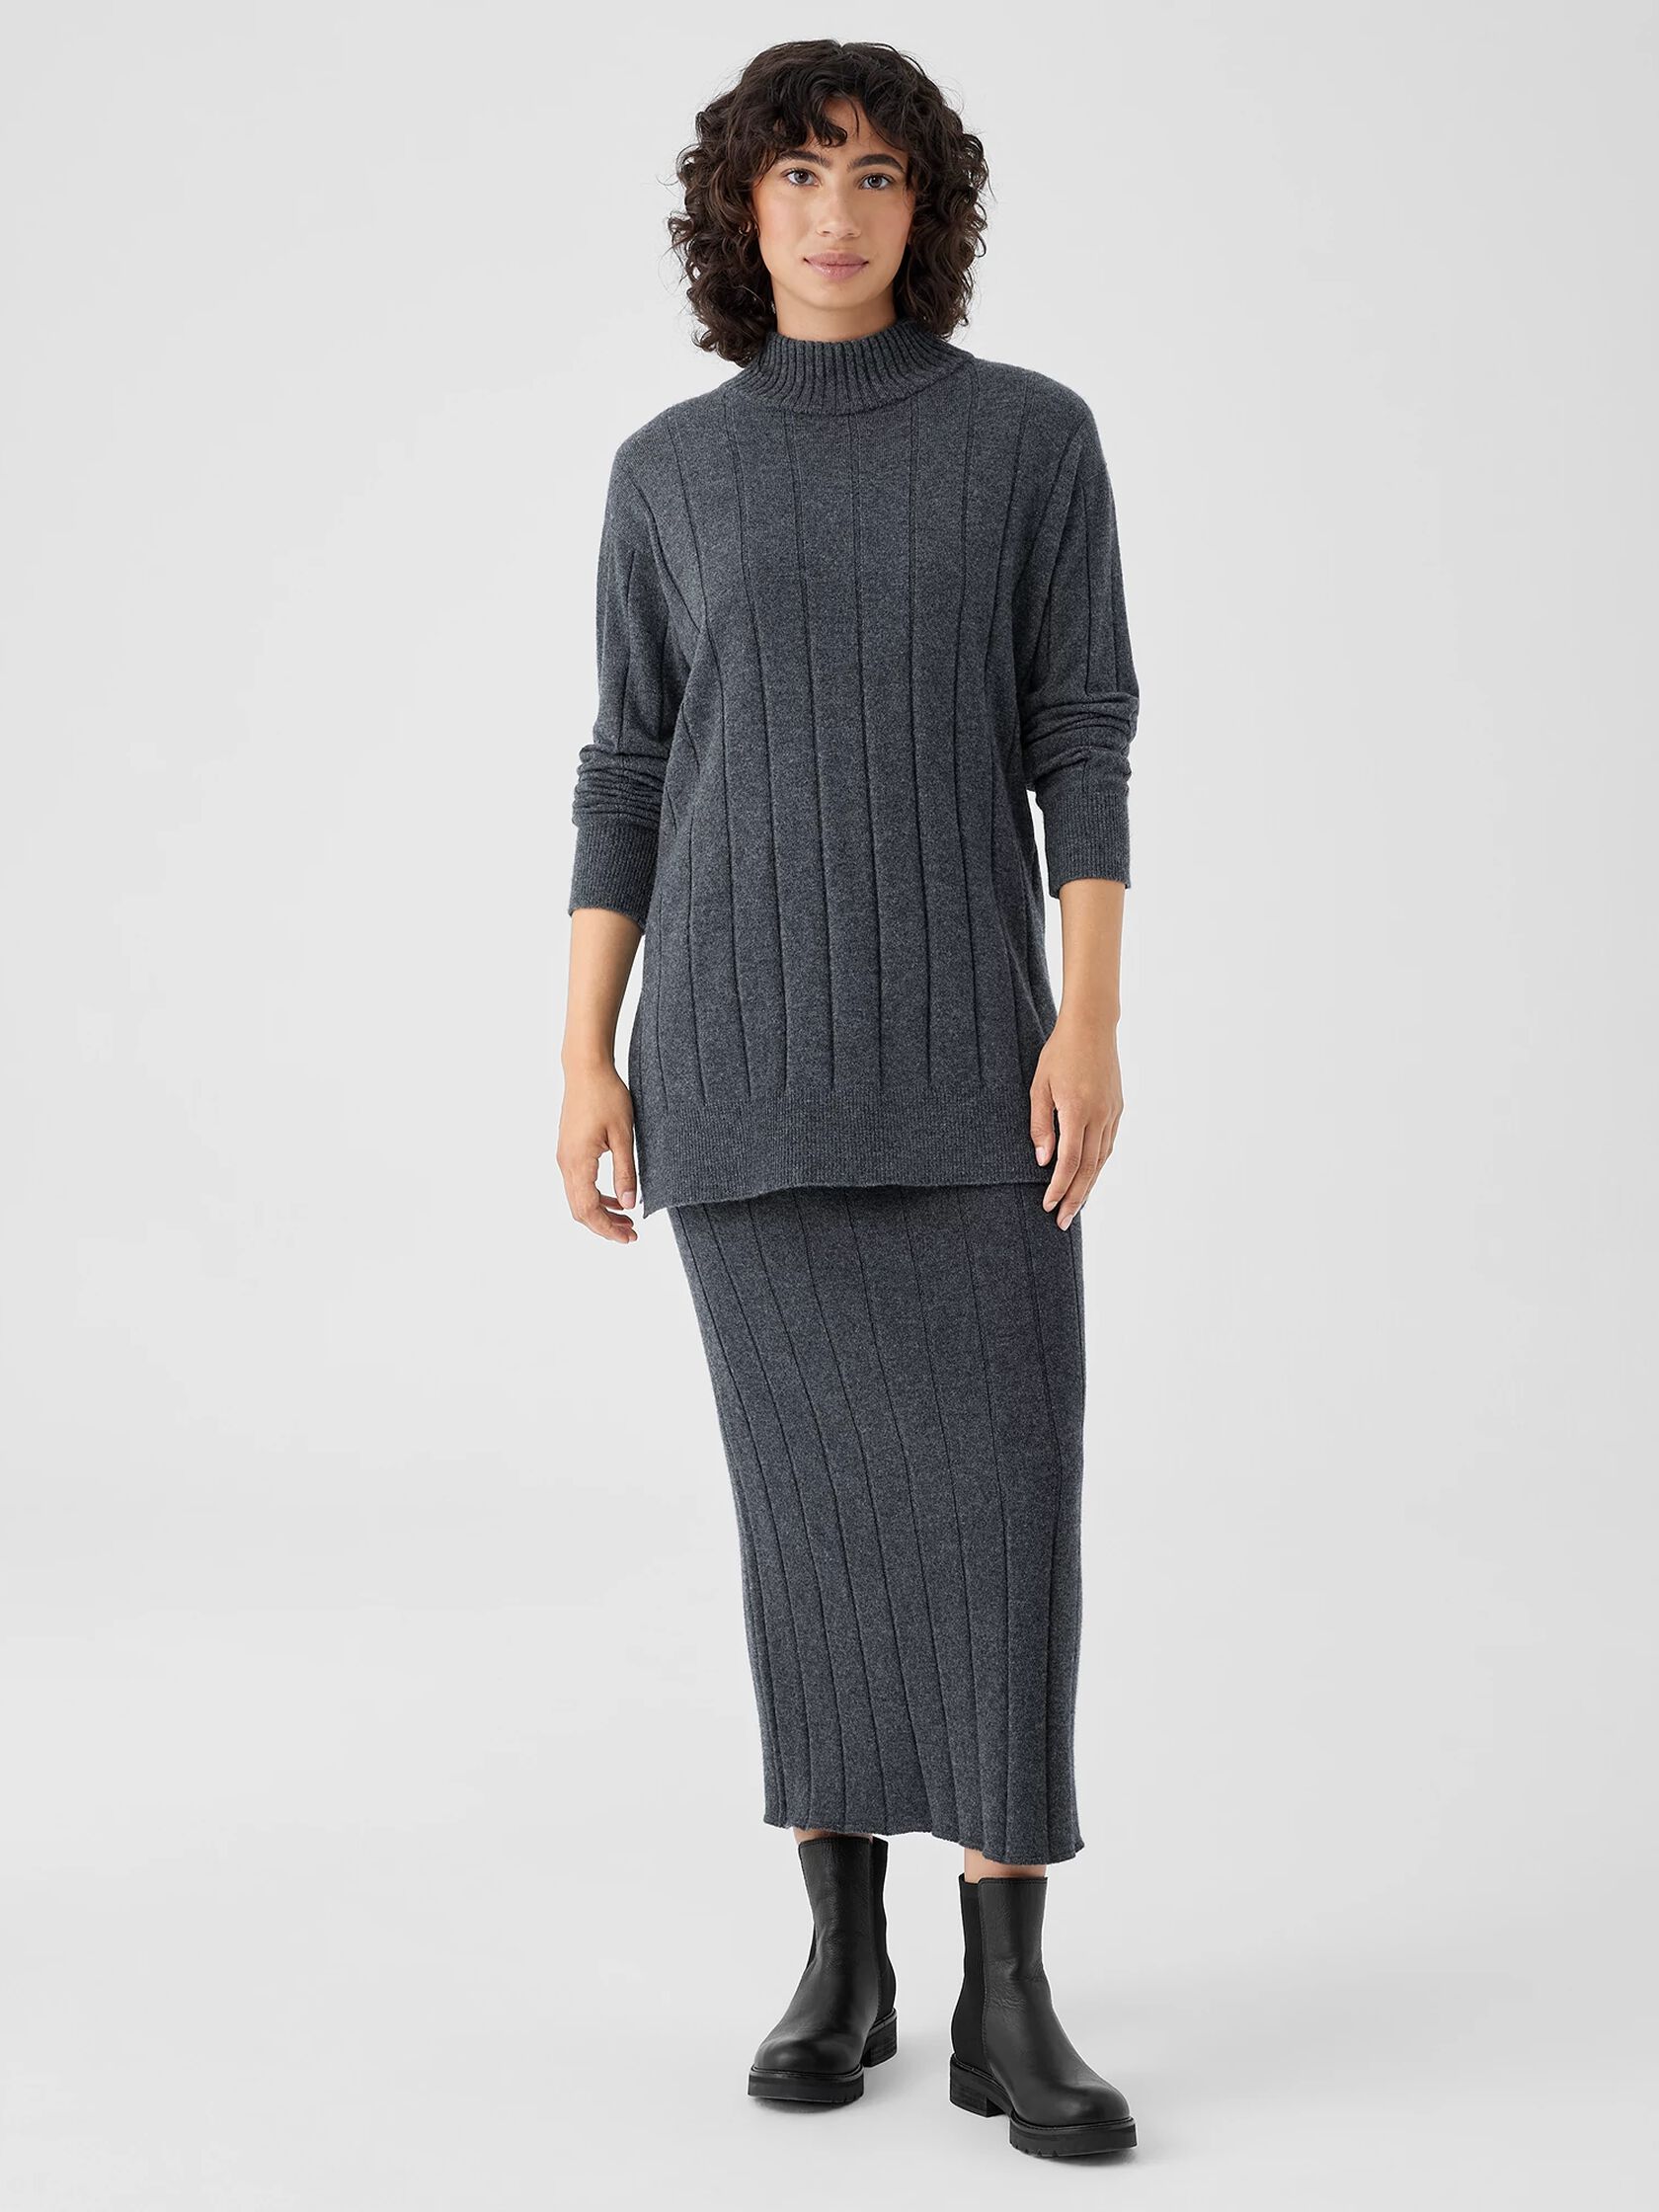 Eileen Fisher Eco Friendly Clothing